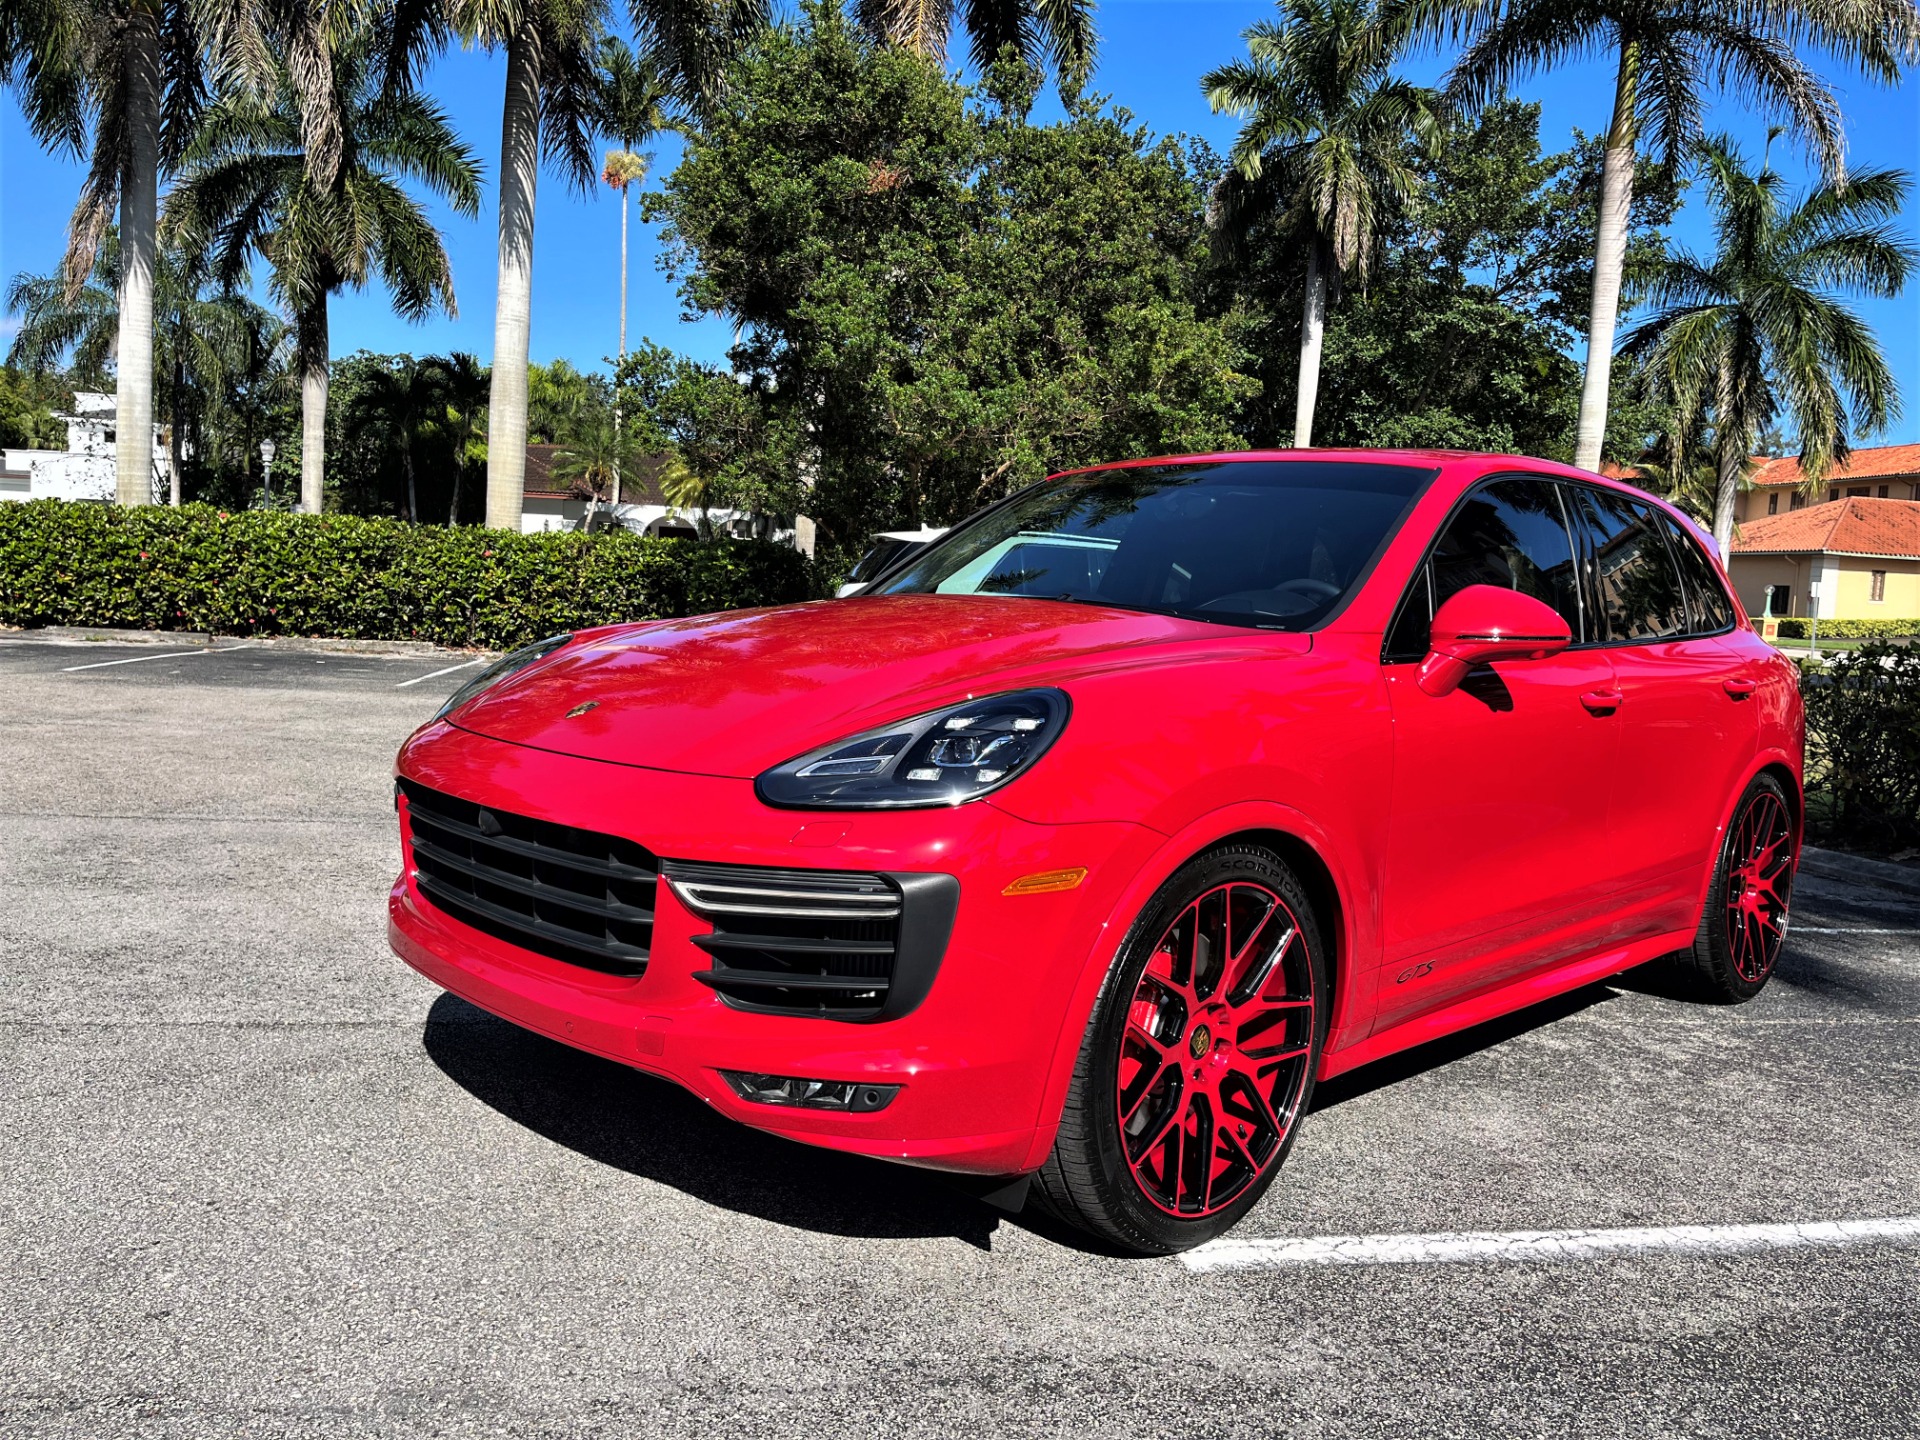 Used 2017 Porsche Cayenne GTS for sale $88,850 at The Gables Sports Cars in Miami FL 33146 4